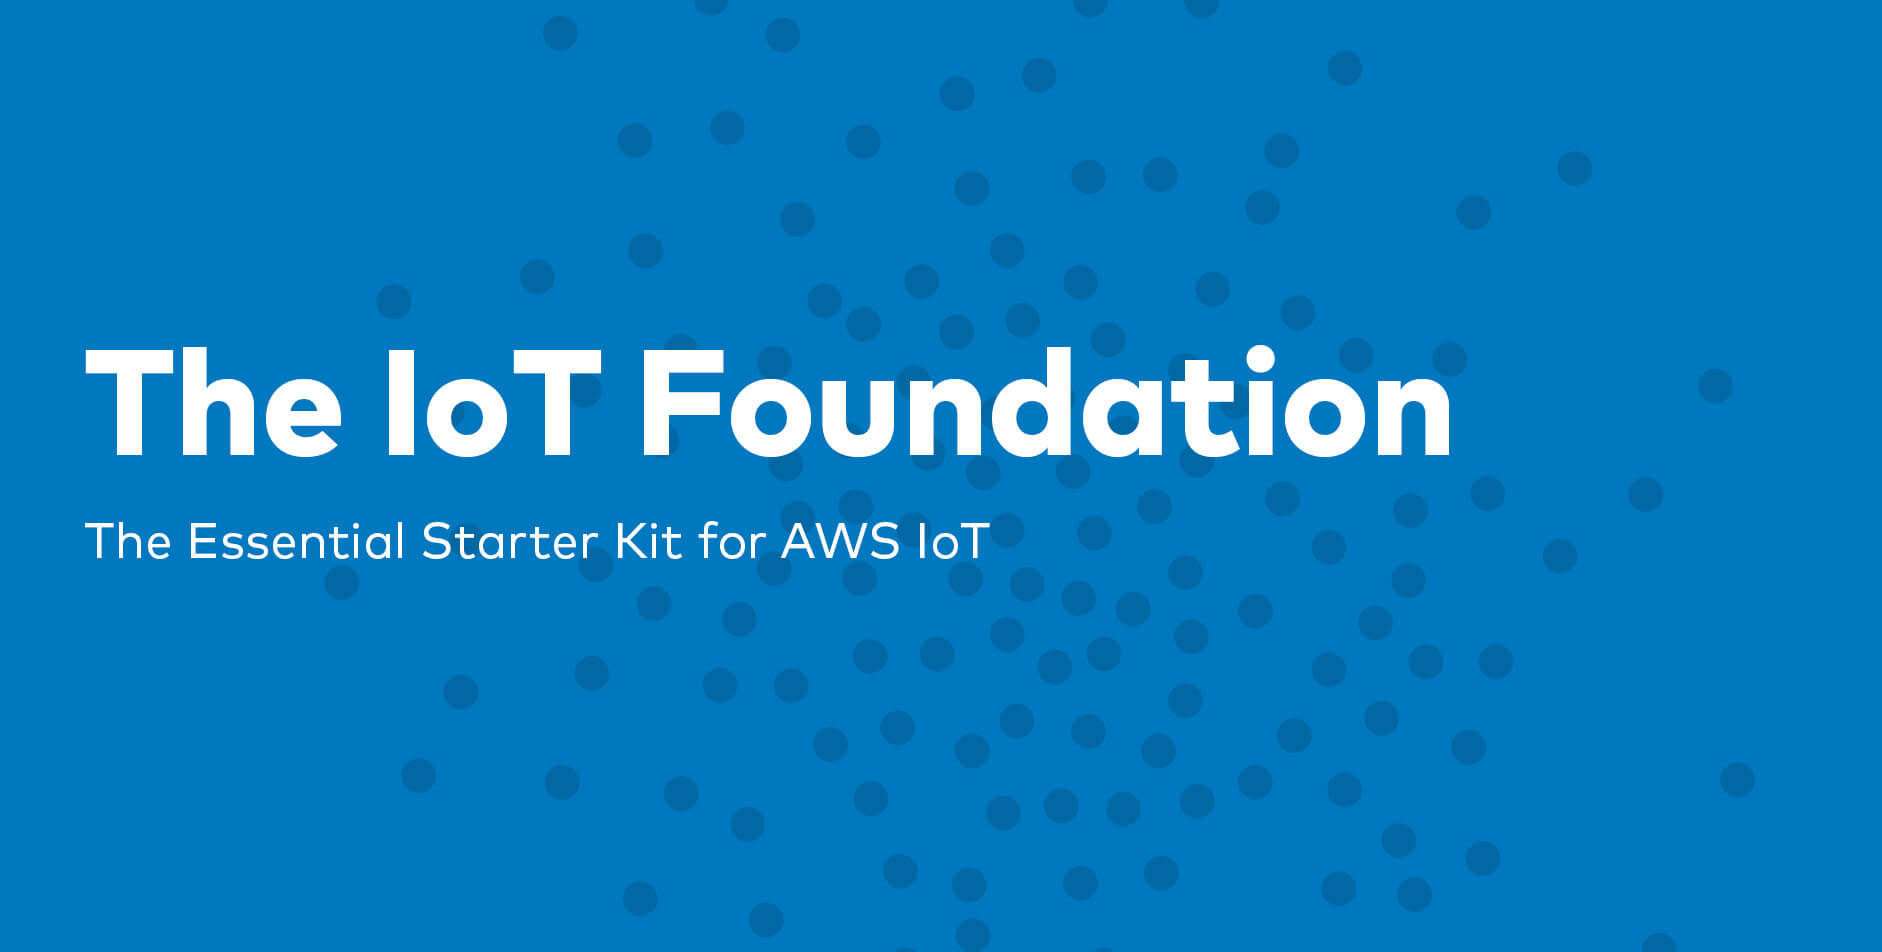 IoT Foundation: The Essential Starter Kit for AWS IoT